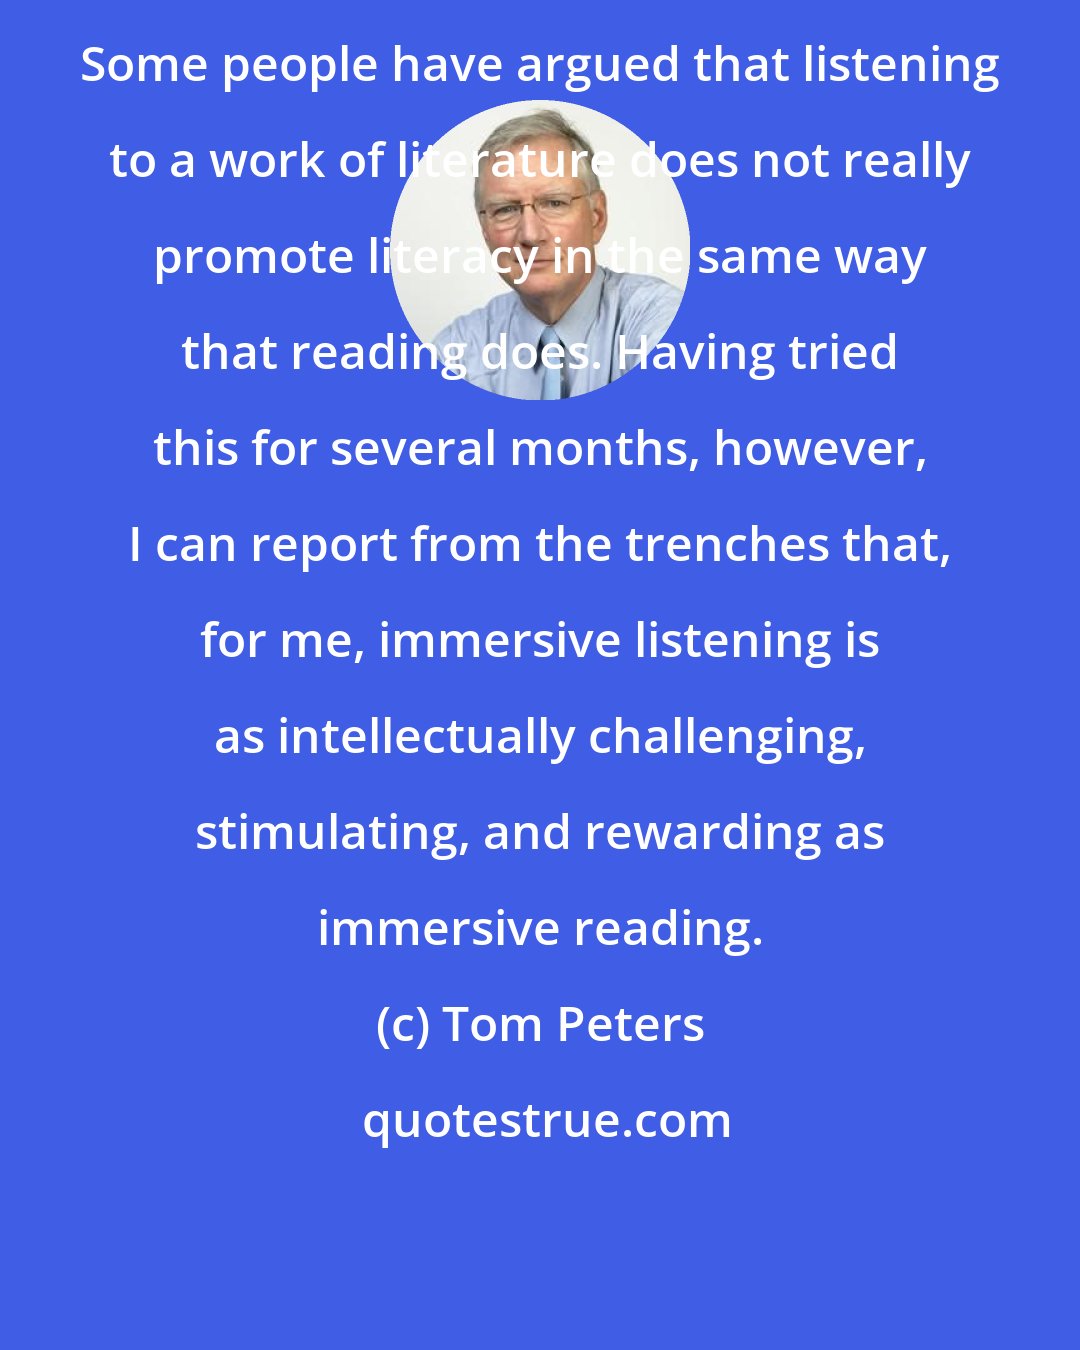 Tom Peters: Some people have argued that listening to a work of literature does not really promote literacy in the same way that reading does. Having tried this for several months, however, I can report from the trenches that, for me, immersive listening is as intellectually challenging, stimulating, and rewarding as immersive reading.